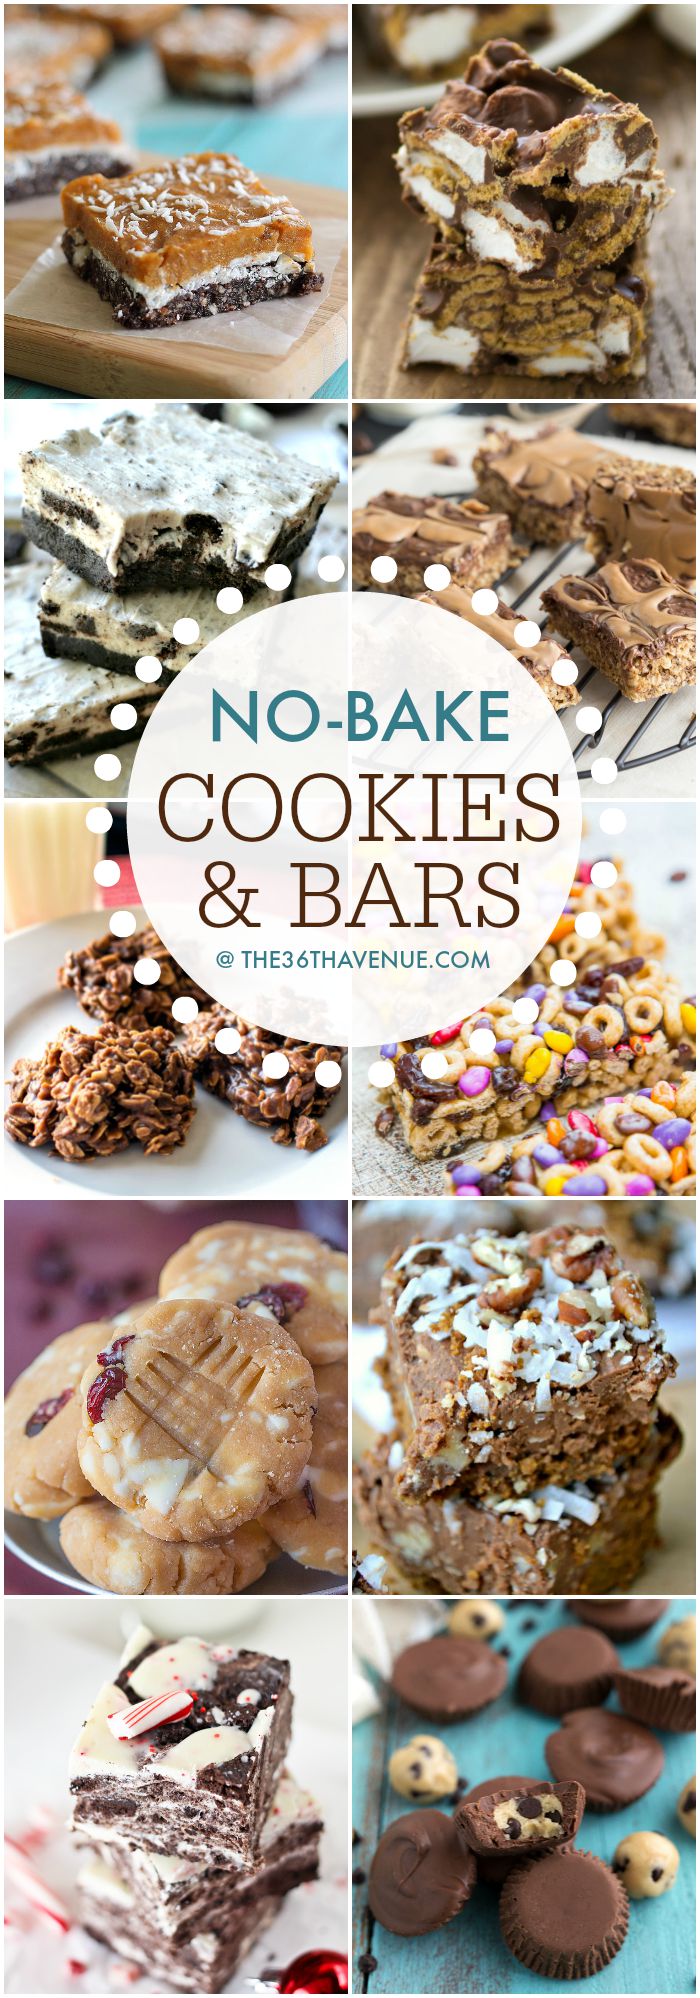 No Bake Cookies and Bars at the36thavenue.com